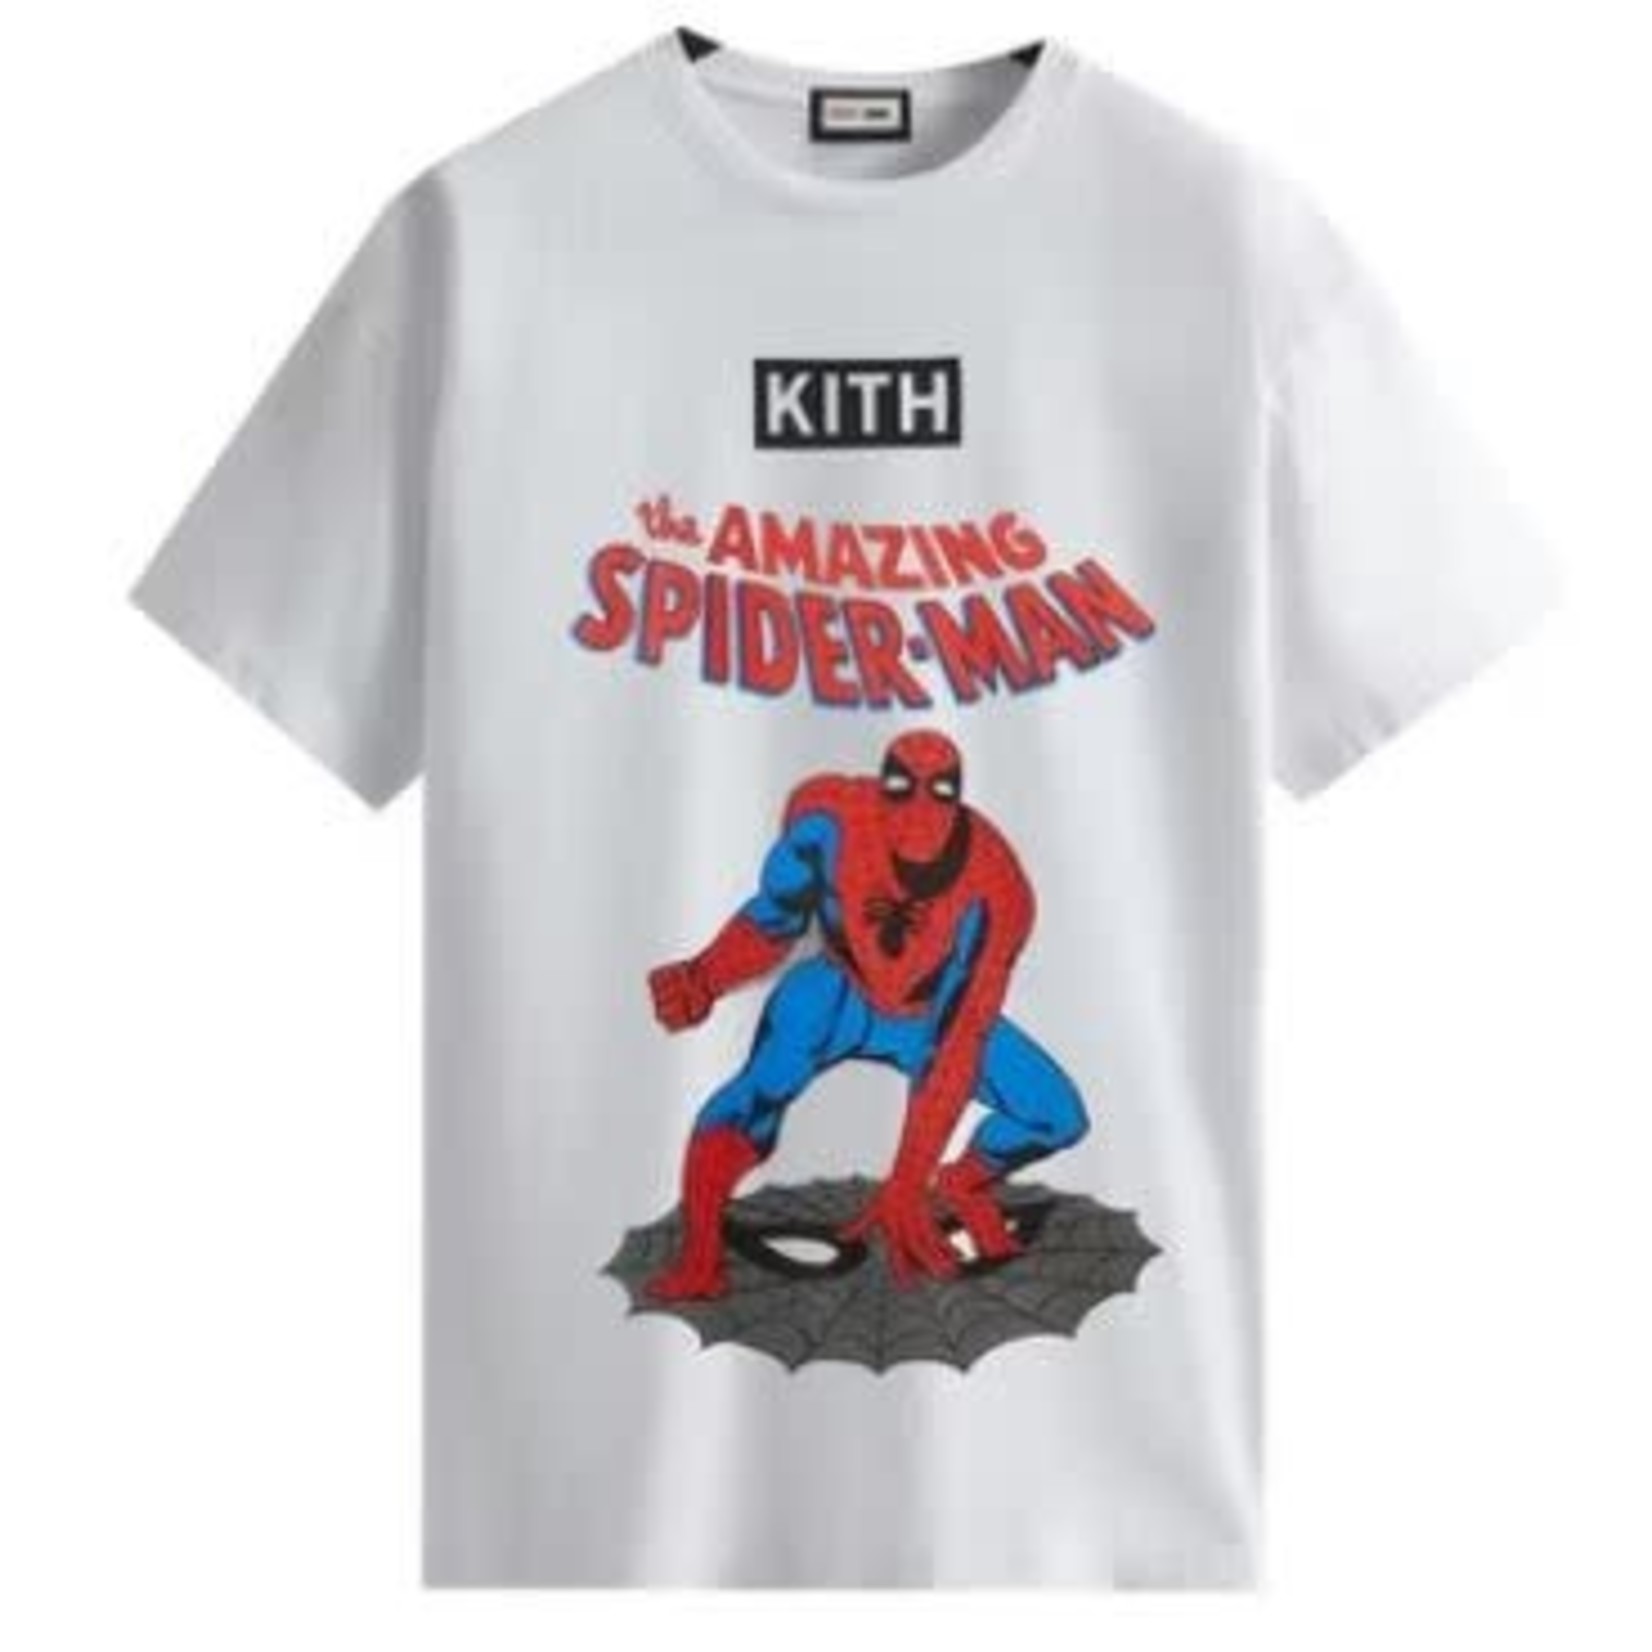 Kith Kith Marvel Spider-Man Allies Vintage Tee Size XSmall, DS BRAND NEW